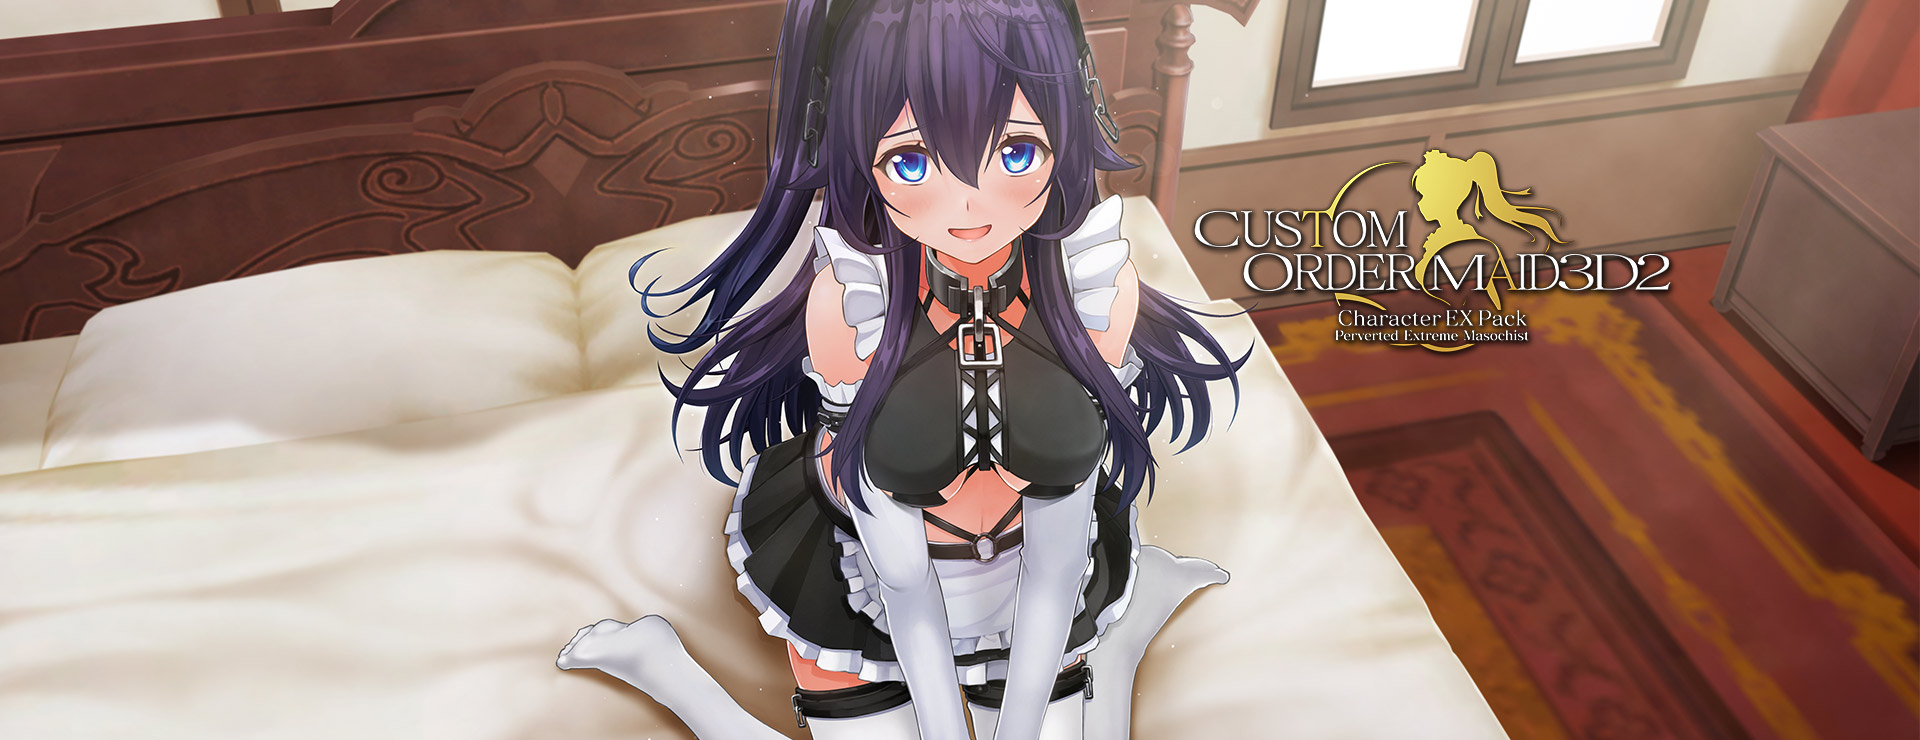 Custom Order Maid 3D 2: Character EX Pack Perverted Extreme Masochist - Simulation Spiel